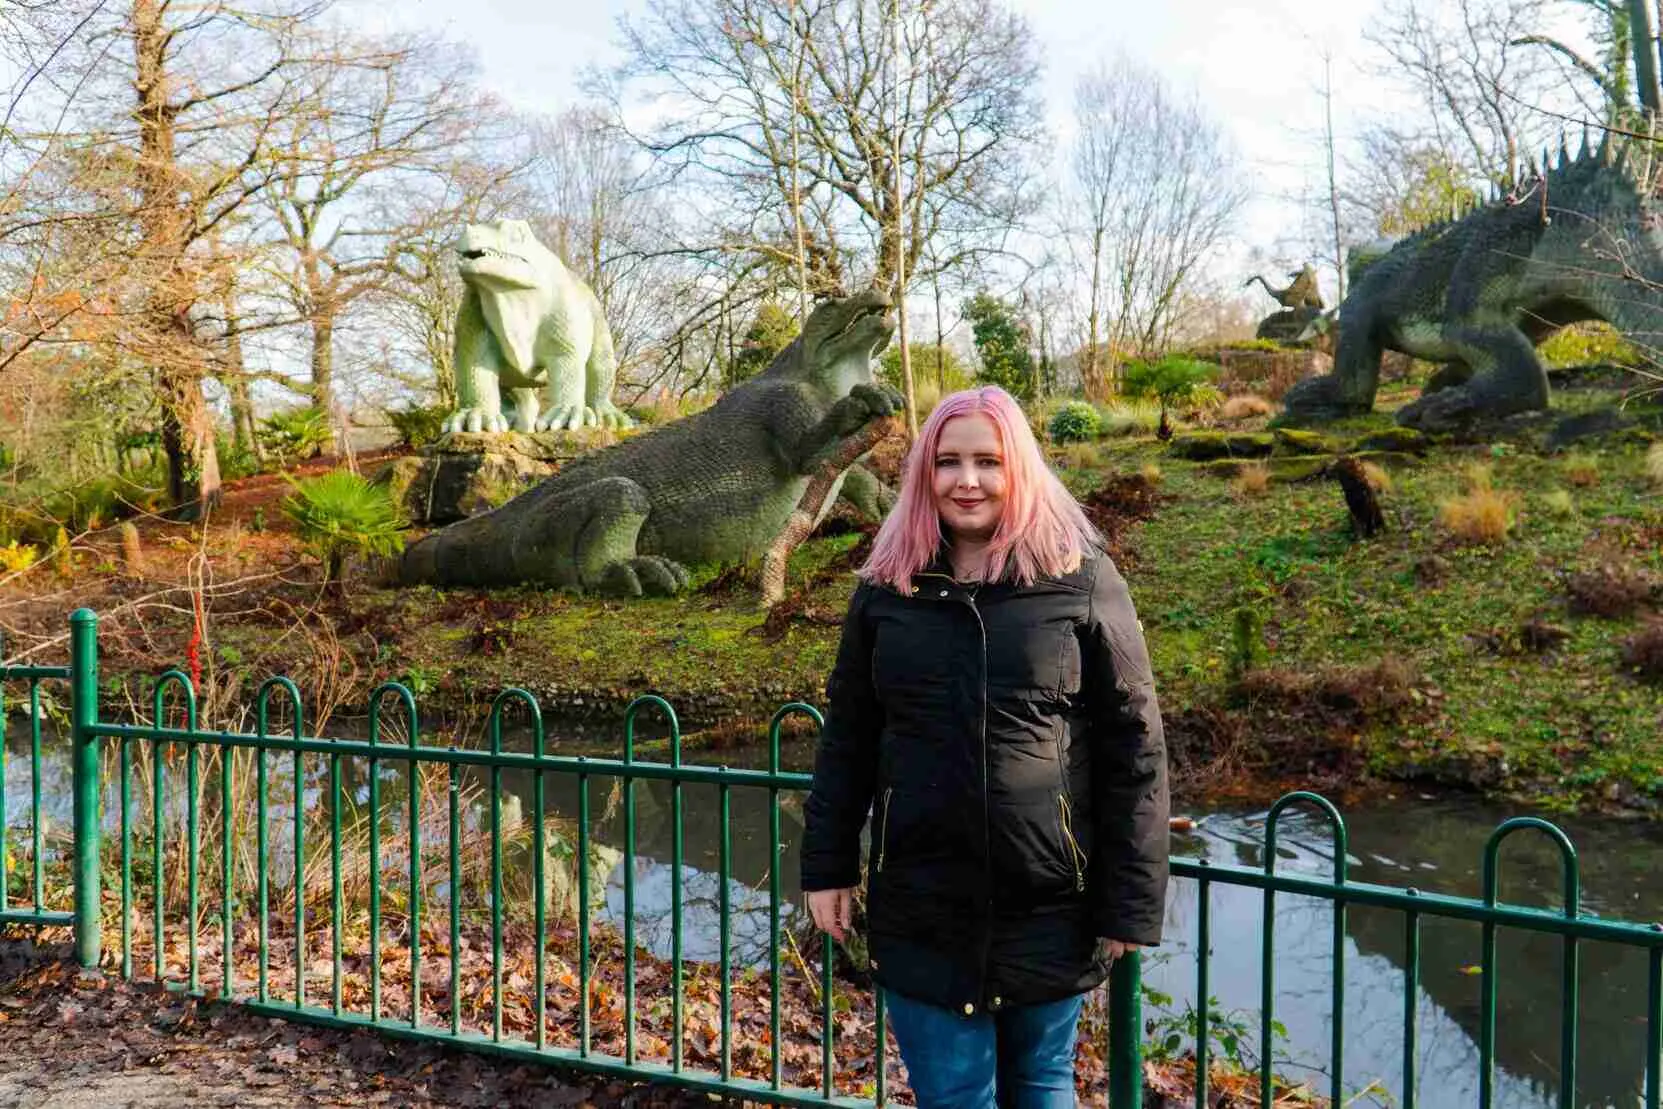 Kat standing in front of Crystal Palace Dinosaurs